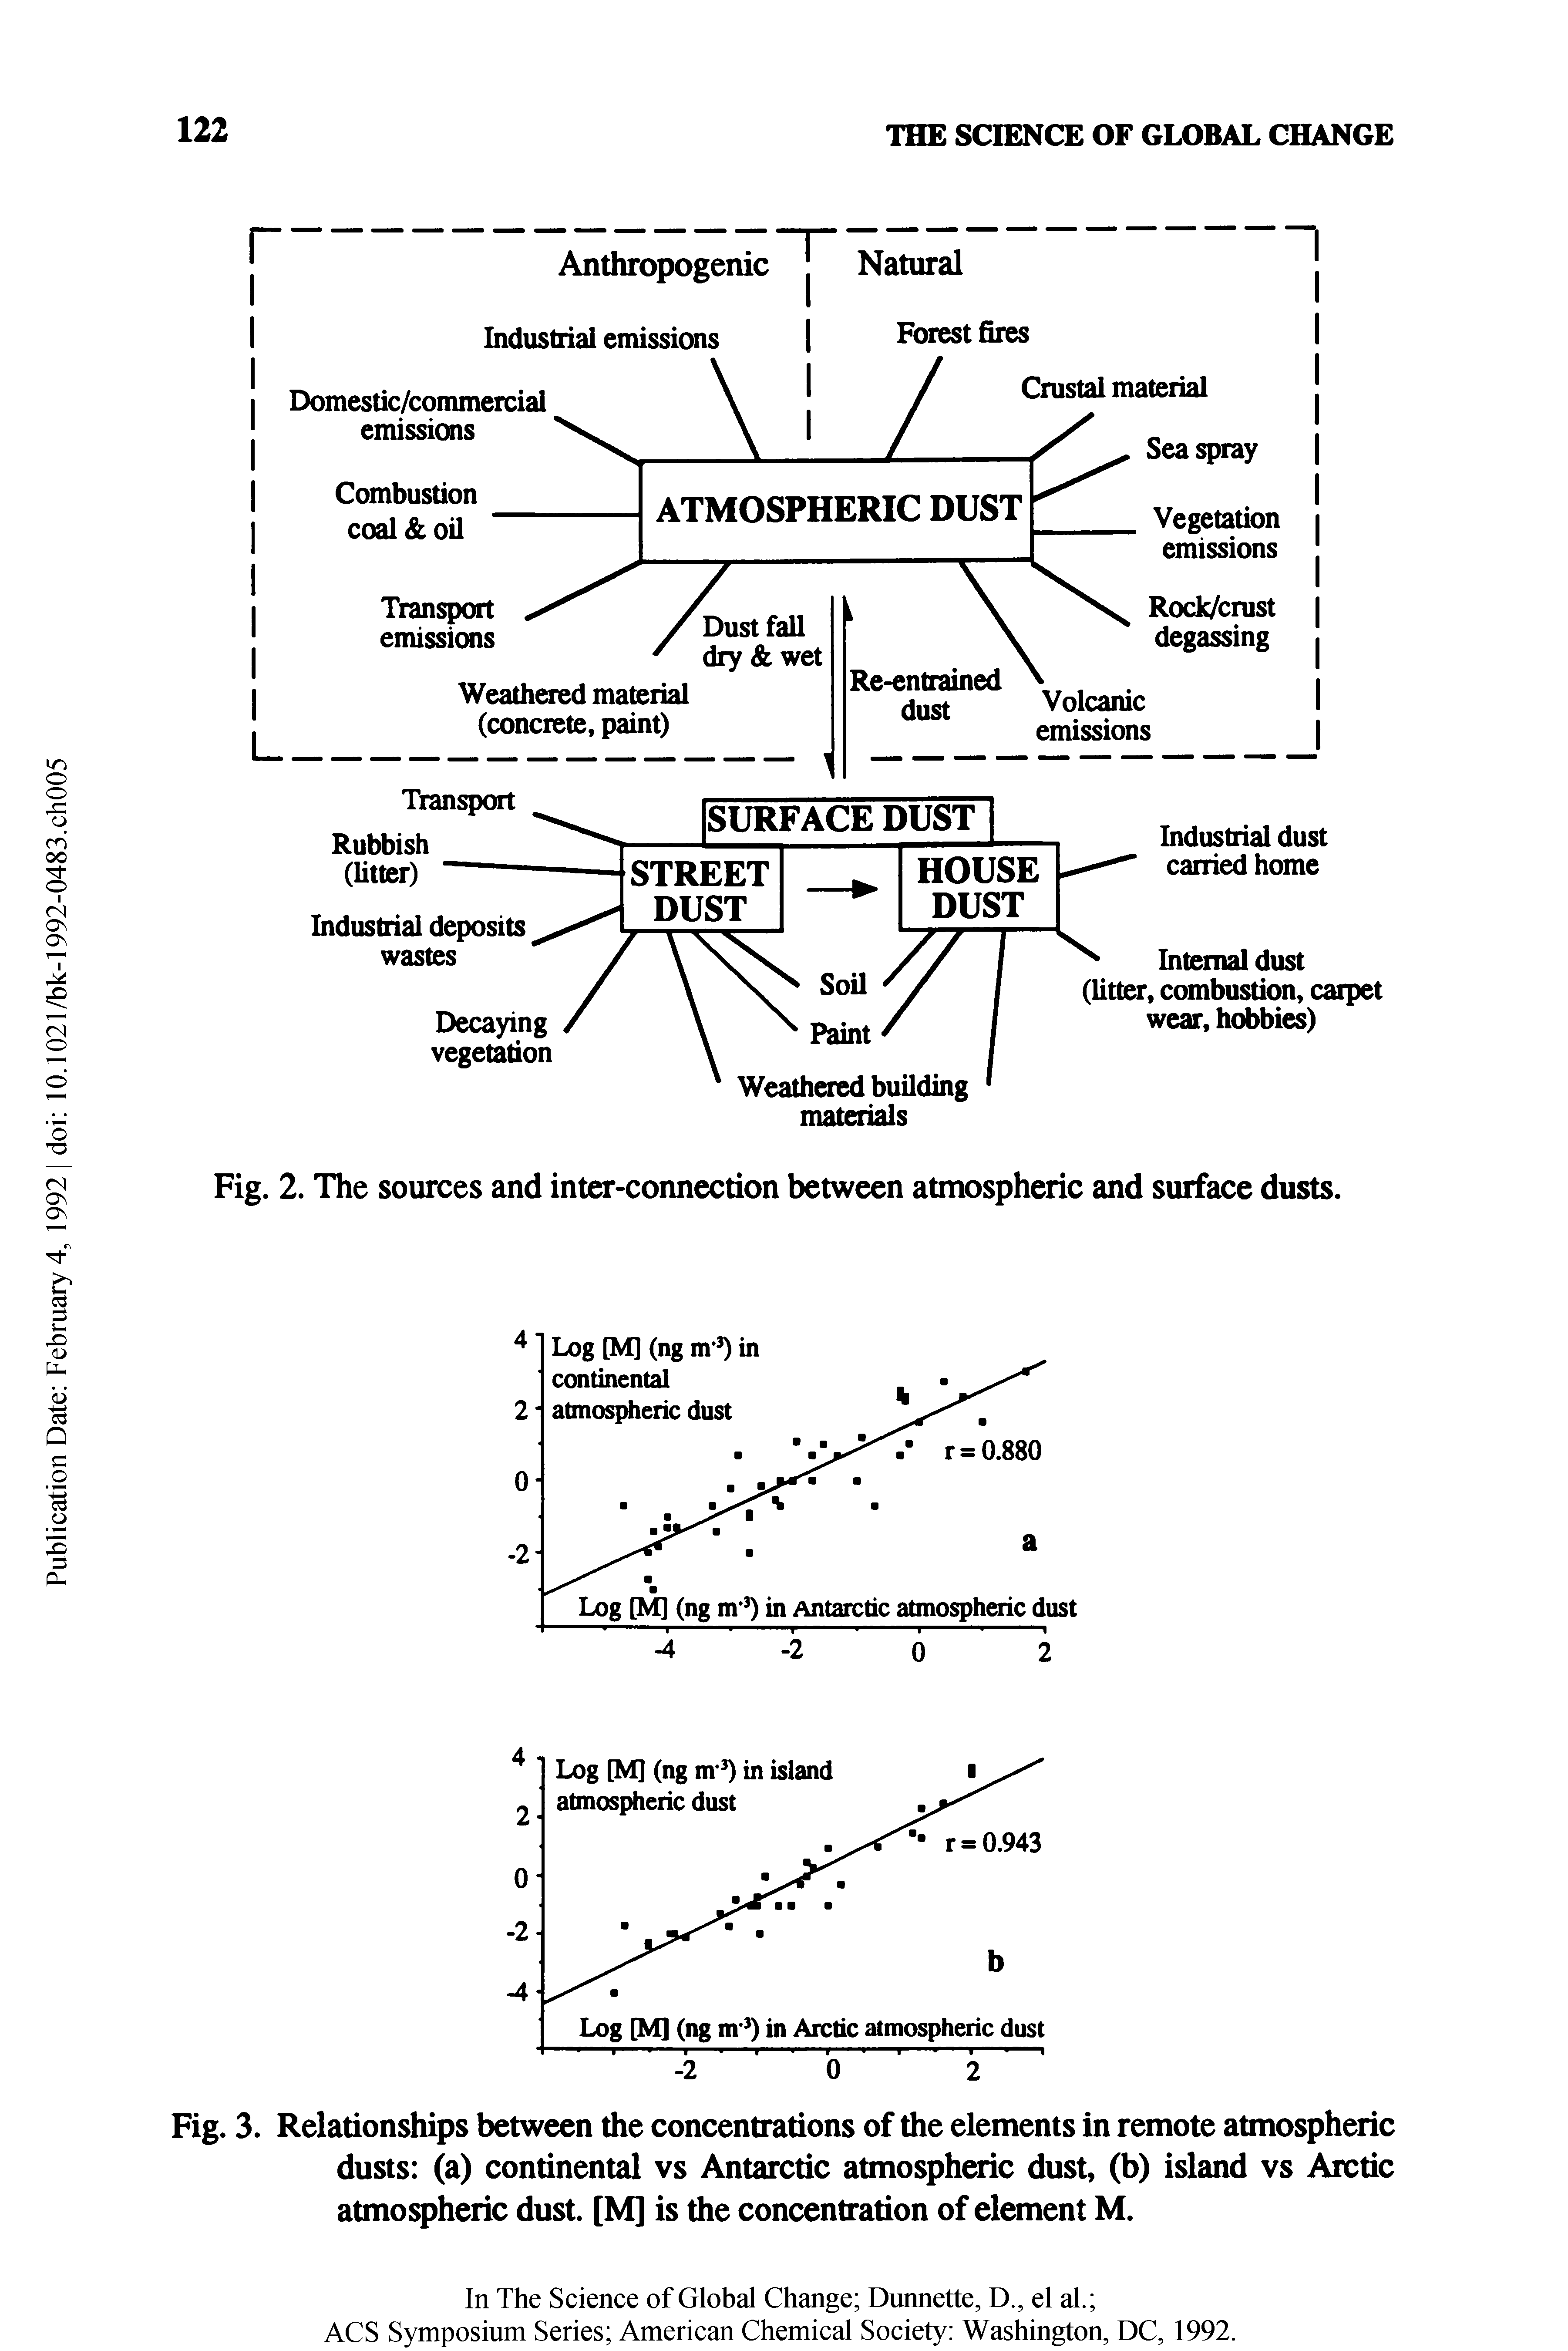 Fig. 3. Relationships between the concentrations of the elements in remote atmospheric dusts (a) continental vs Antarctic atmospheric dust, (b) island vs Arctic atmospheric dust. [M] is the concentration of element M.